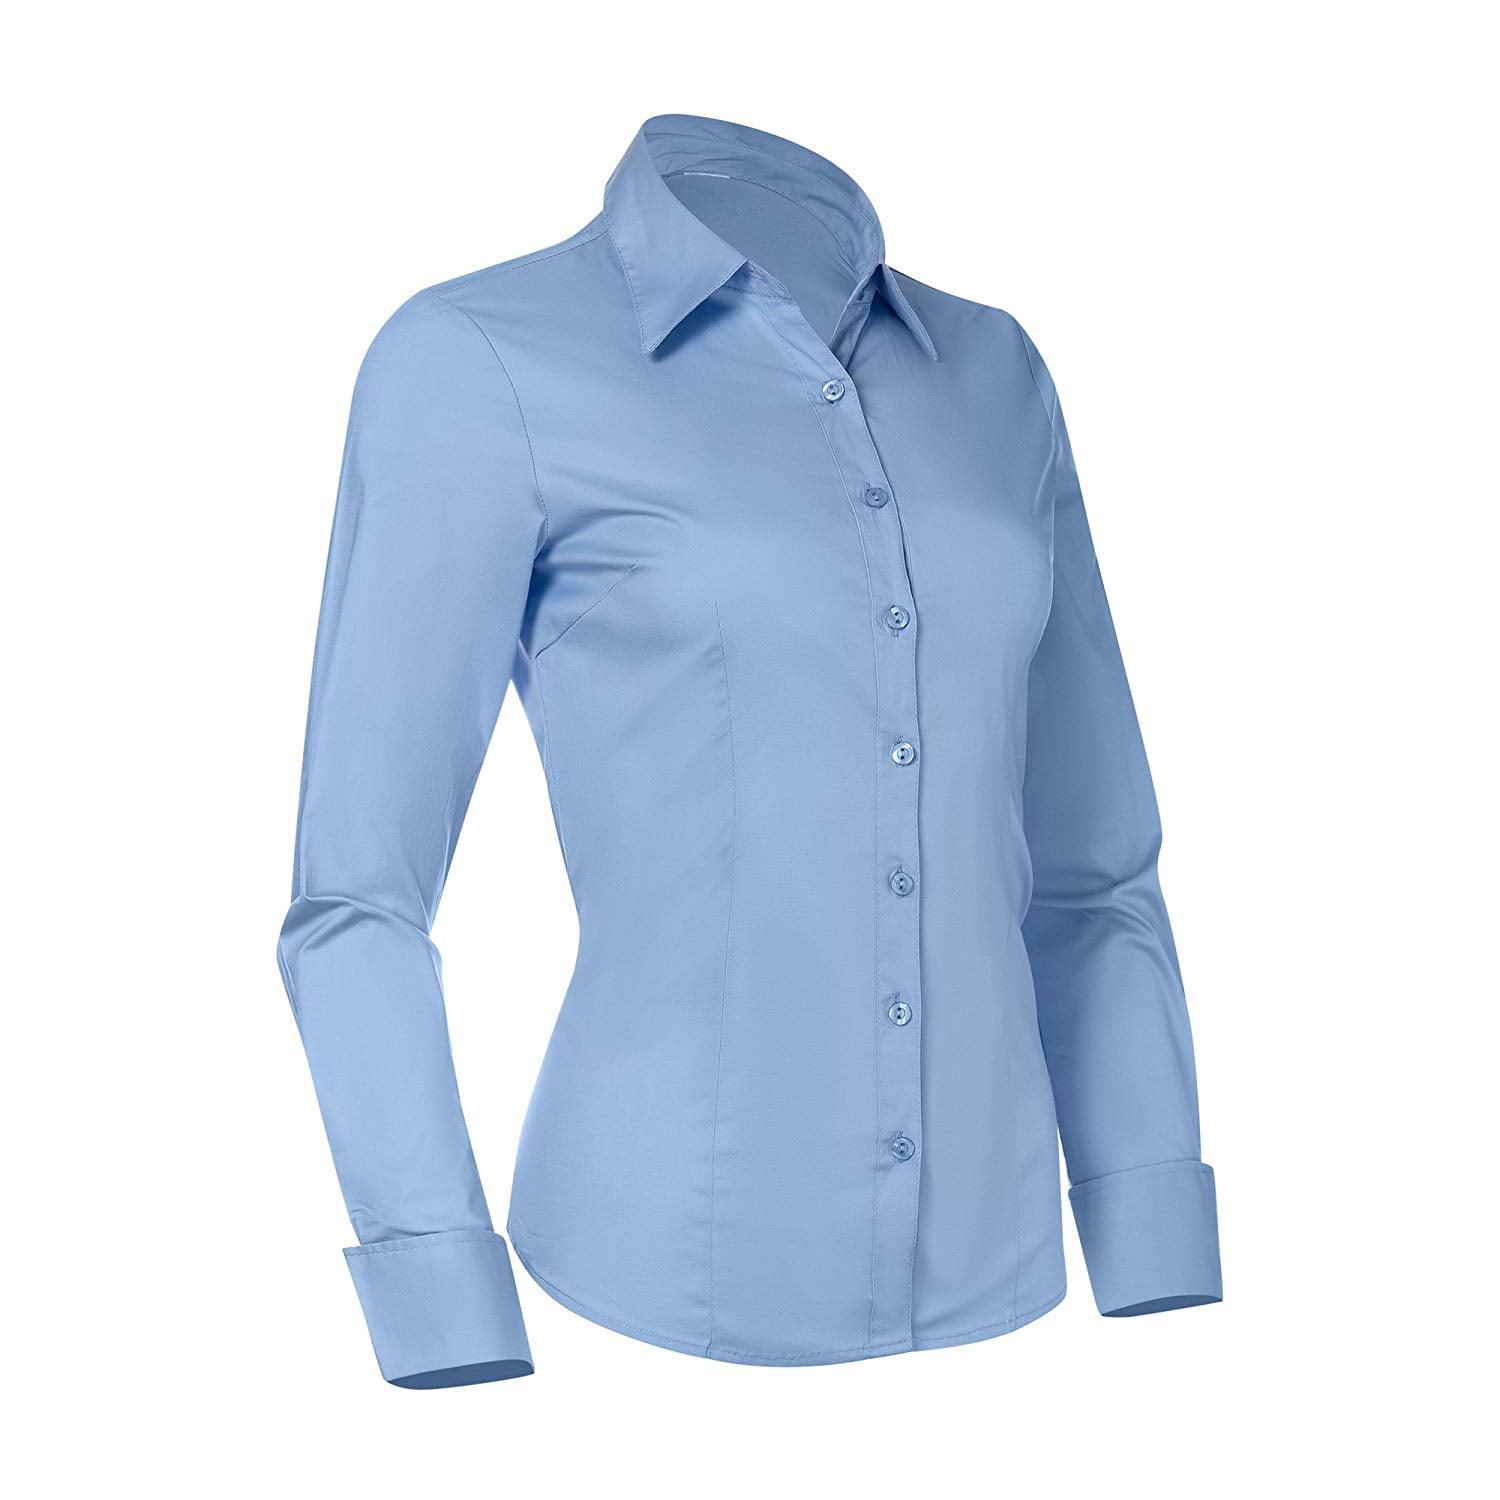 Pier 17 Pier 17 Button Down Shirts For Women Fitted Long Sleeve